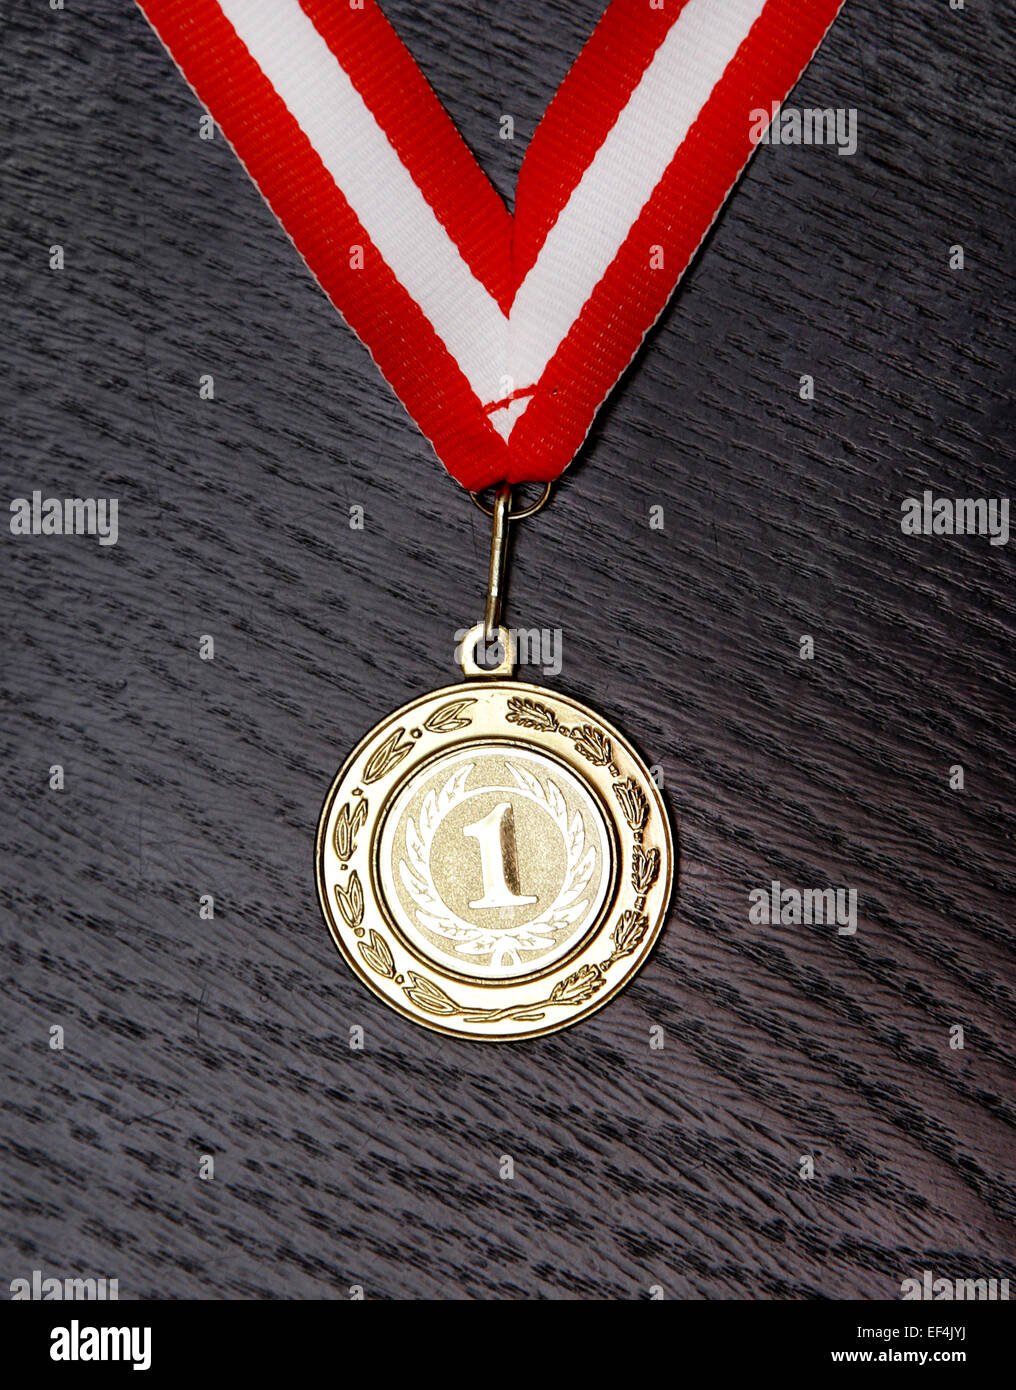 golden medal for first place with red and white ribbon Stock Photo